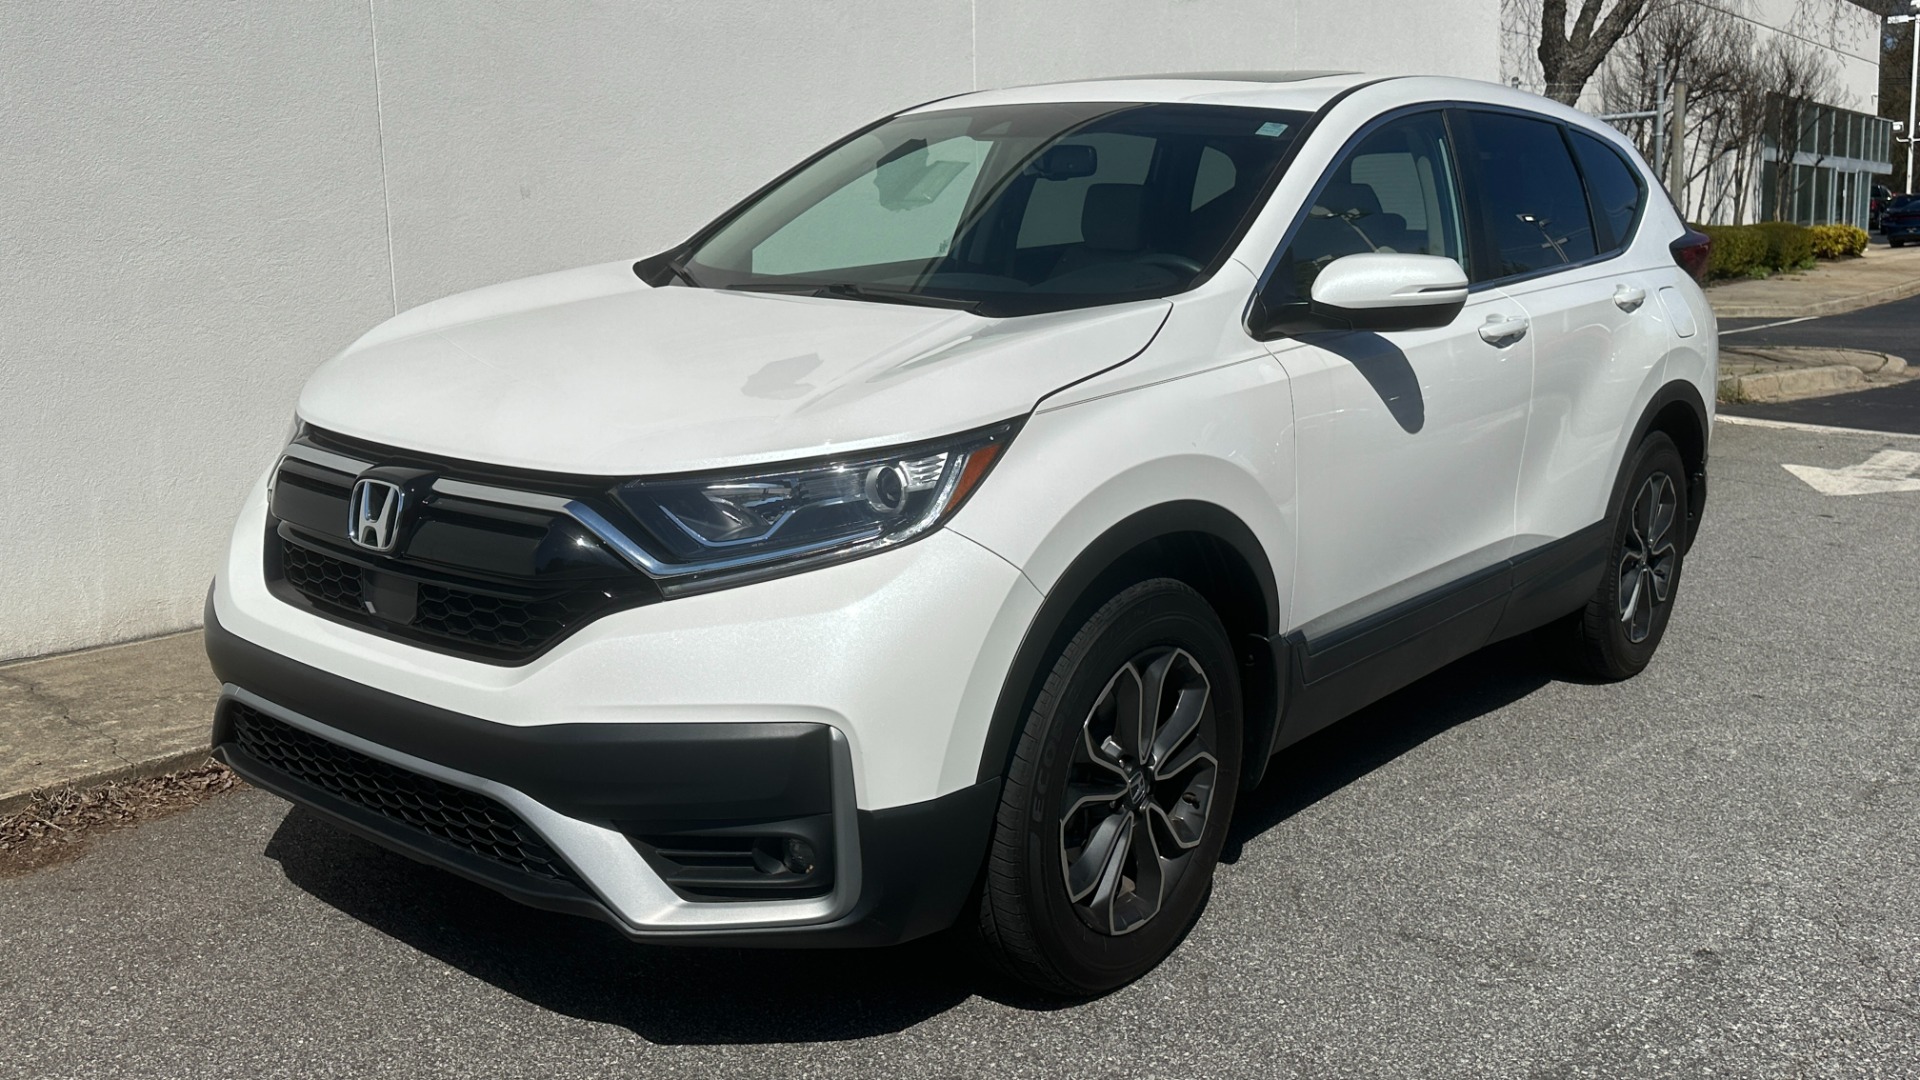 Used 2021 Honda CR-V EX-L / LEATHER / SAFETY ASSIST / PEARL PAINT for sale $31,695 at Formula Imports in Charlotte NC 28227 5